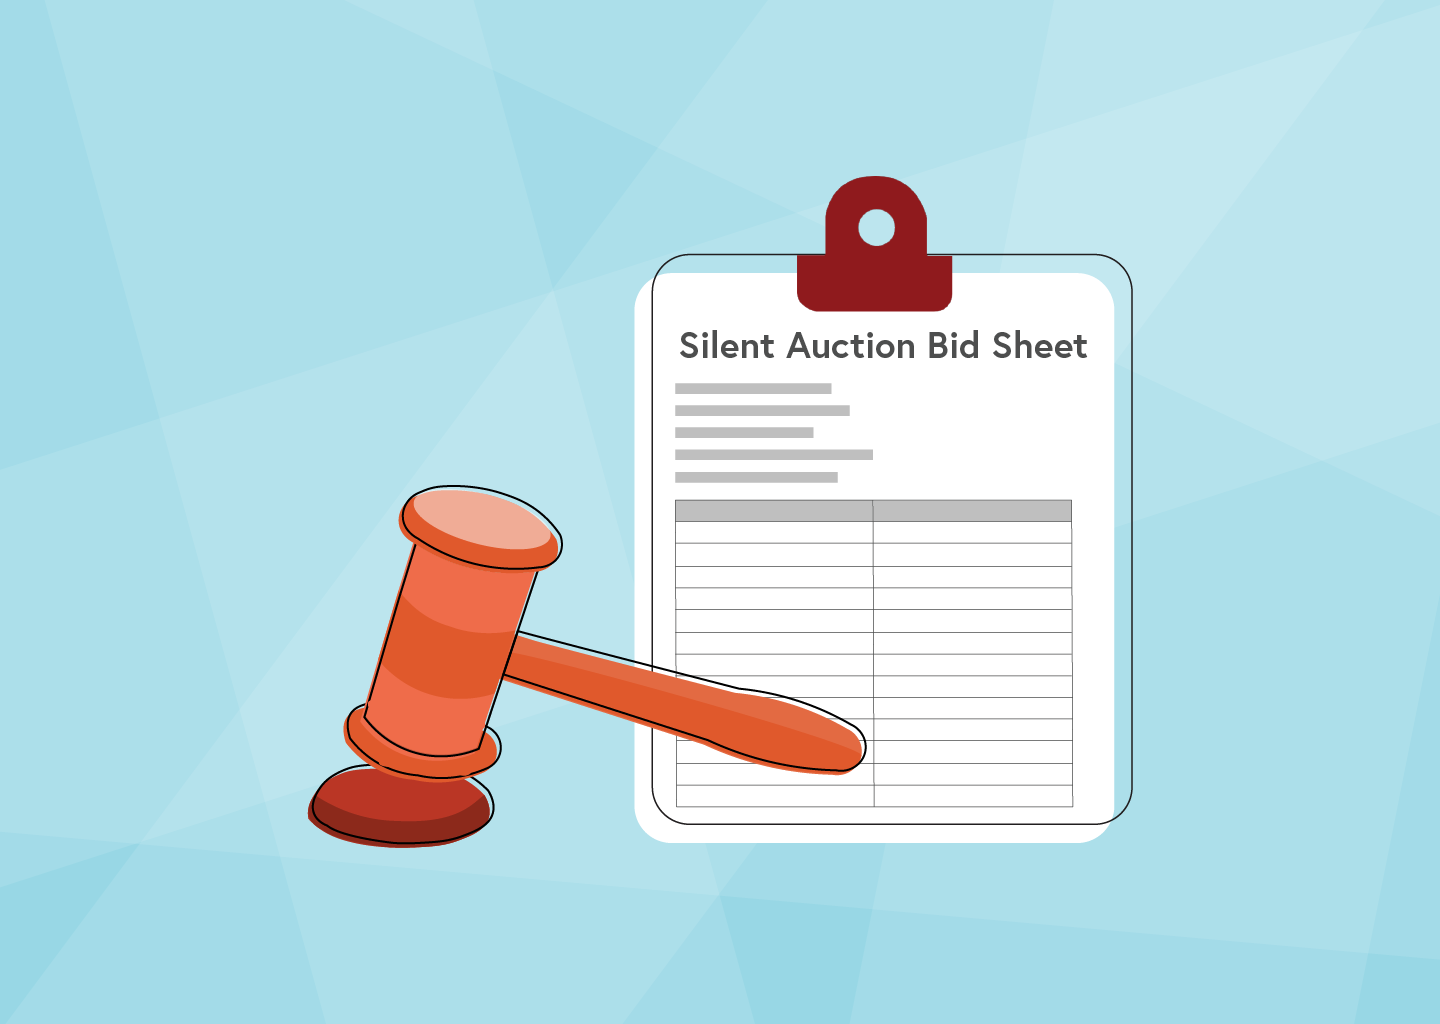 How To Create a Silent Auction Bid Sheet + Free Template